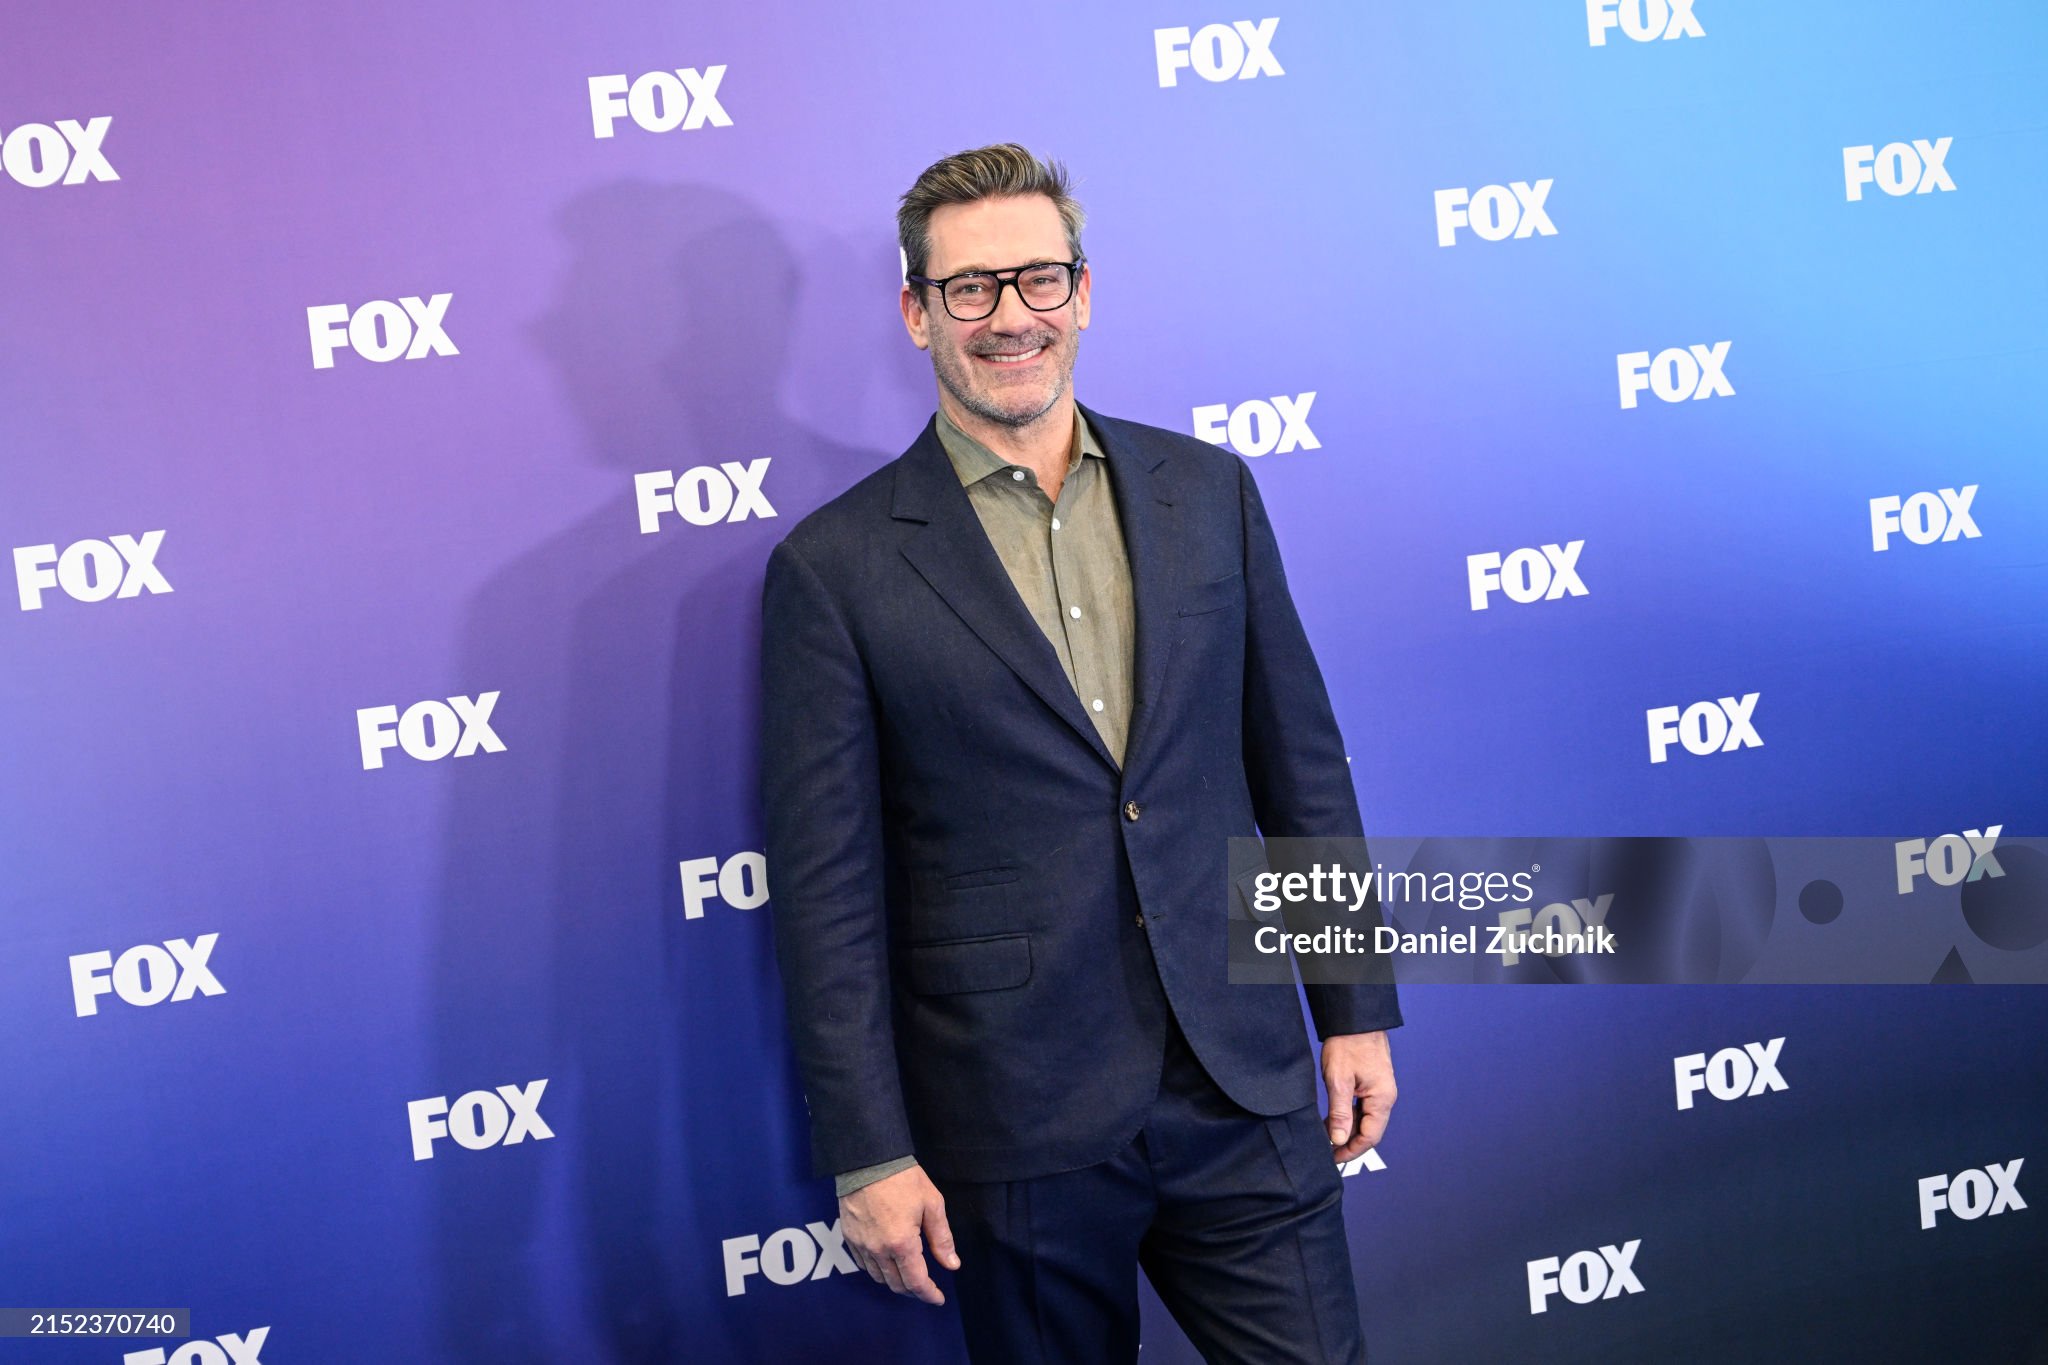 gettyimages-2152370740-2048x2048.jpg